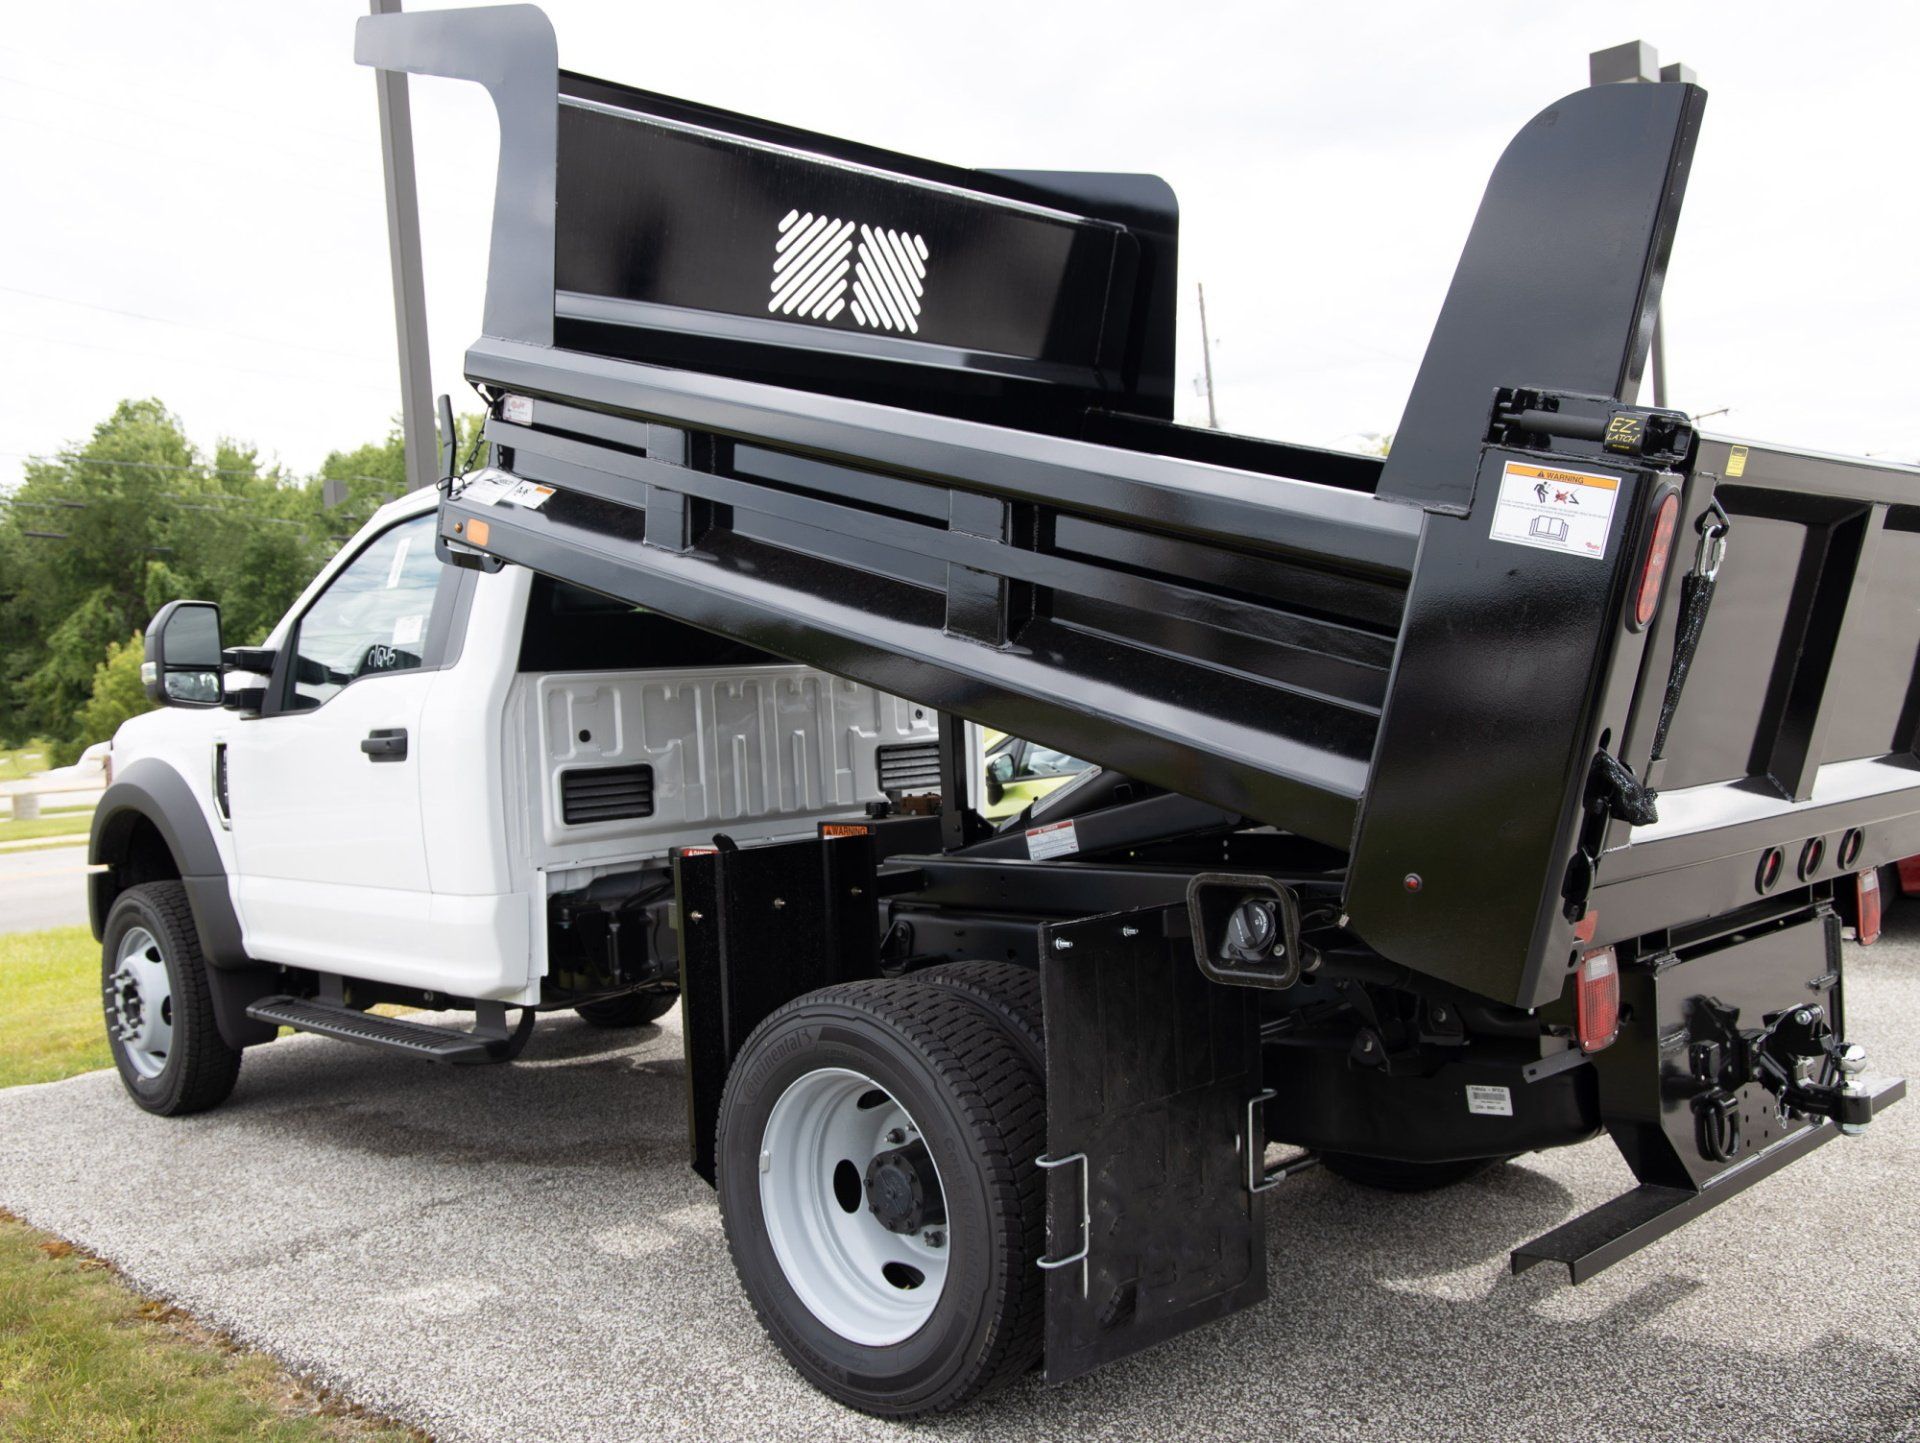 A white dump truck with a black dump bed is parked on the side of the road.